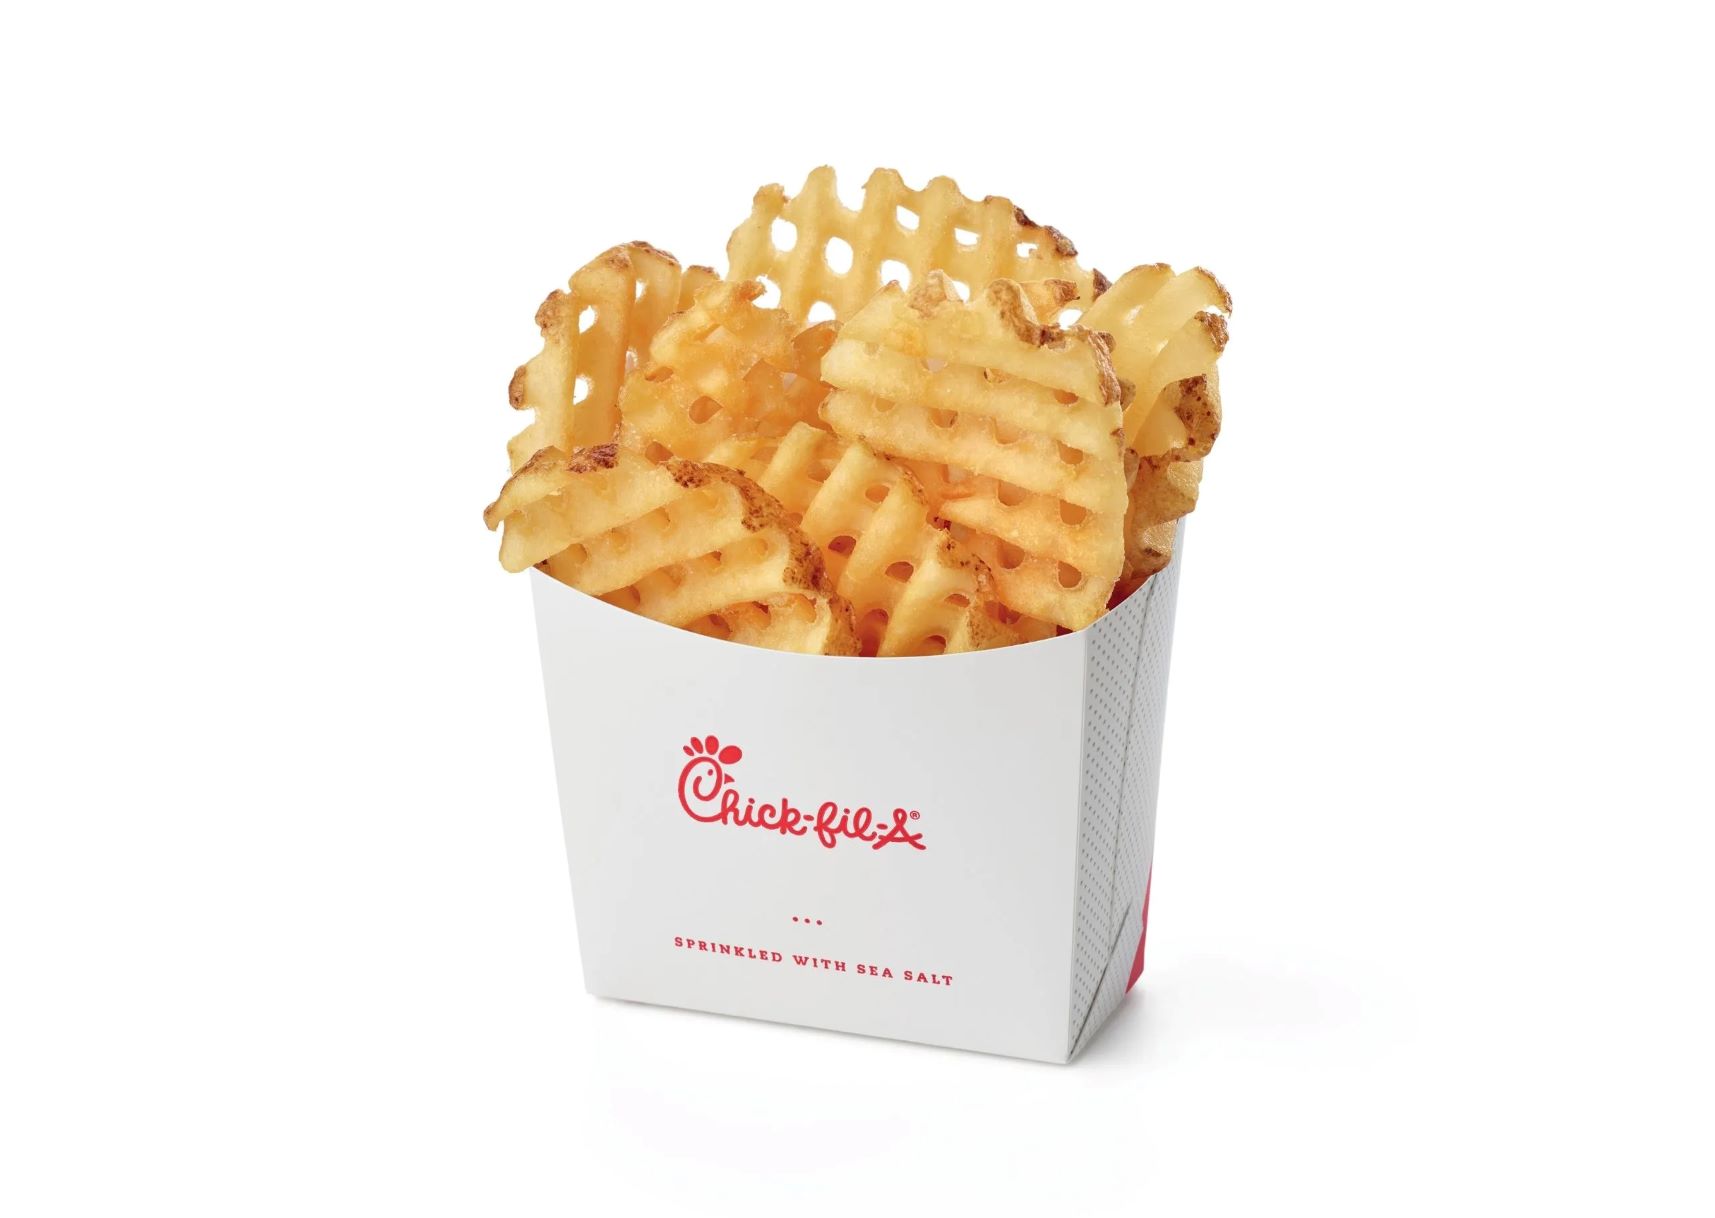 18-chick-fil-a-fries-nutrition-facts